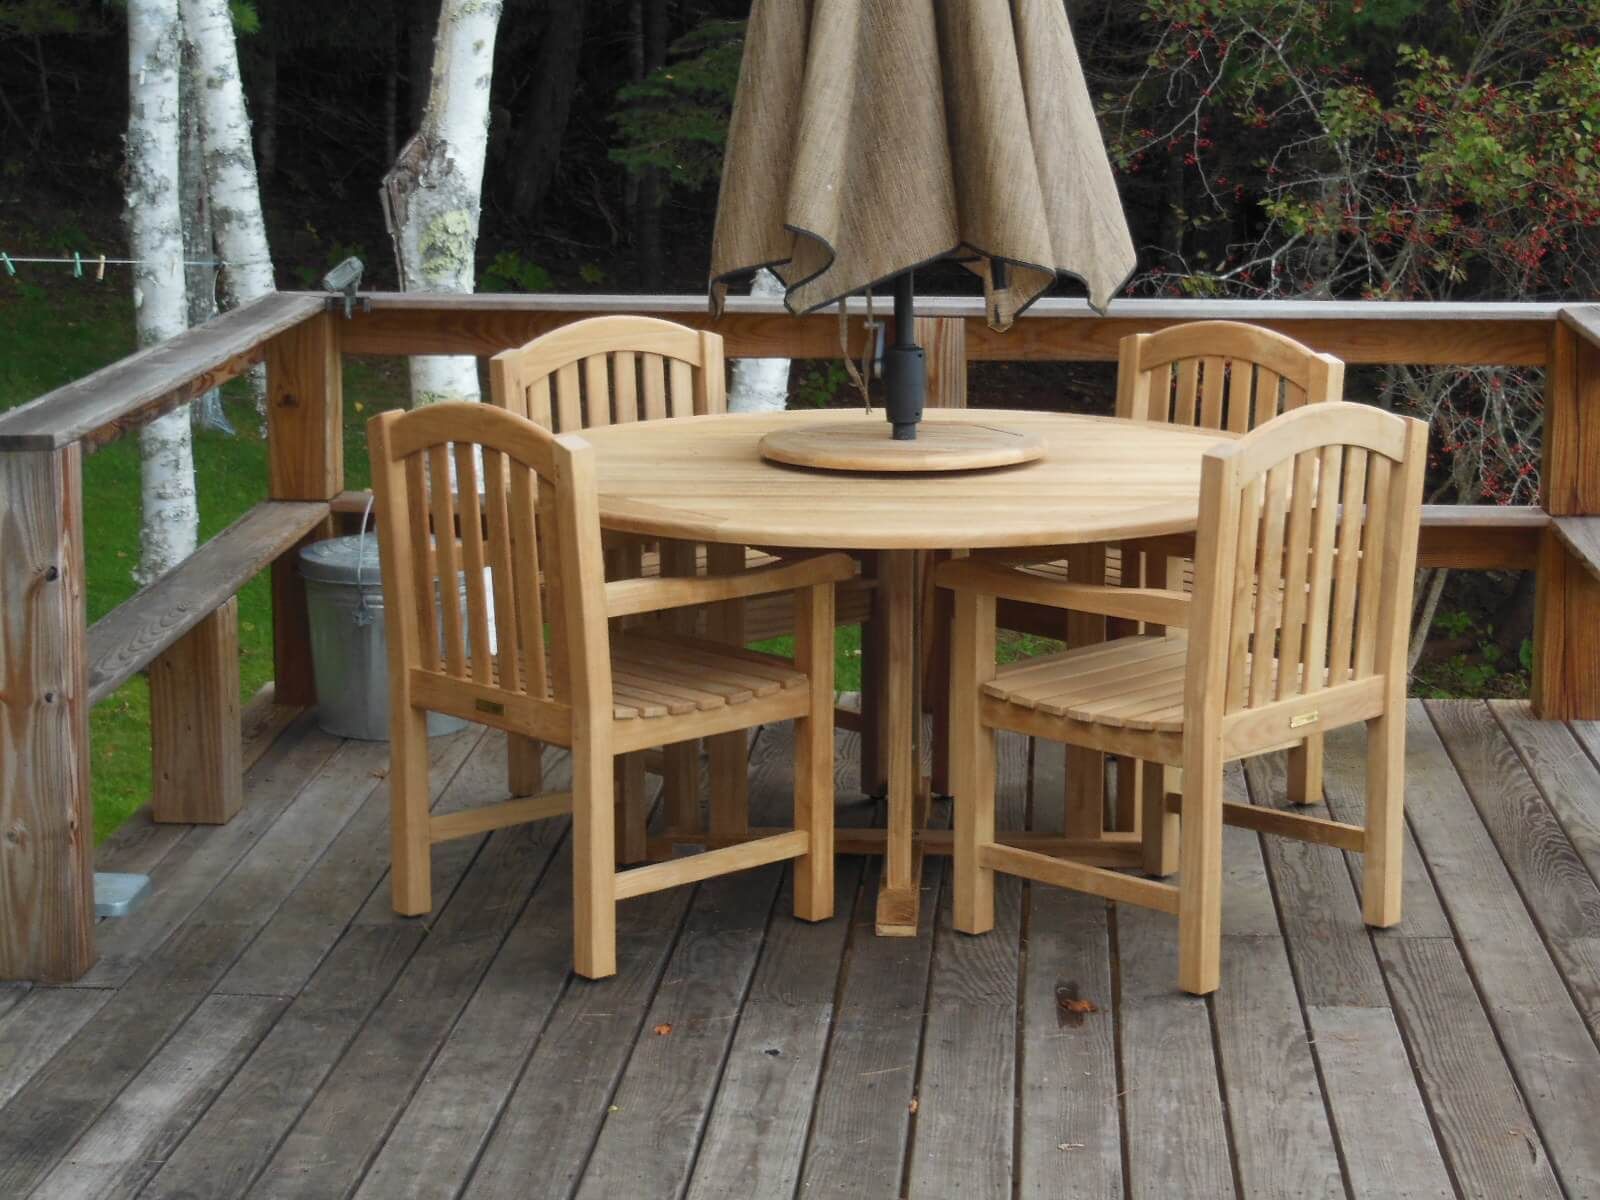 Teak Outdoor Furniture: The Ultimate Choice For Durability And Style